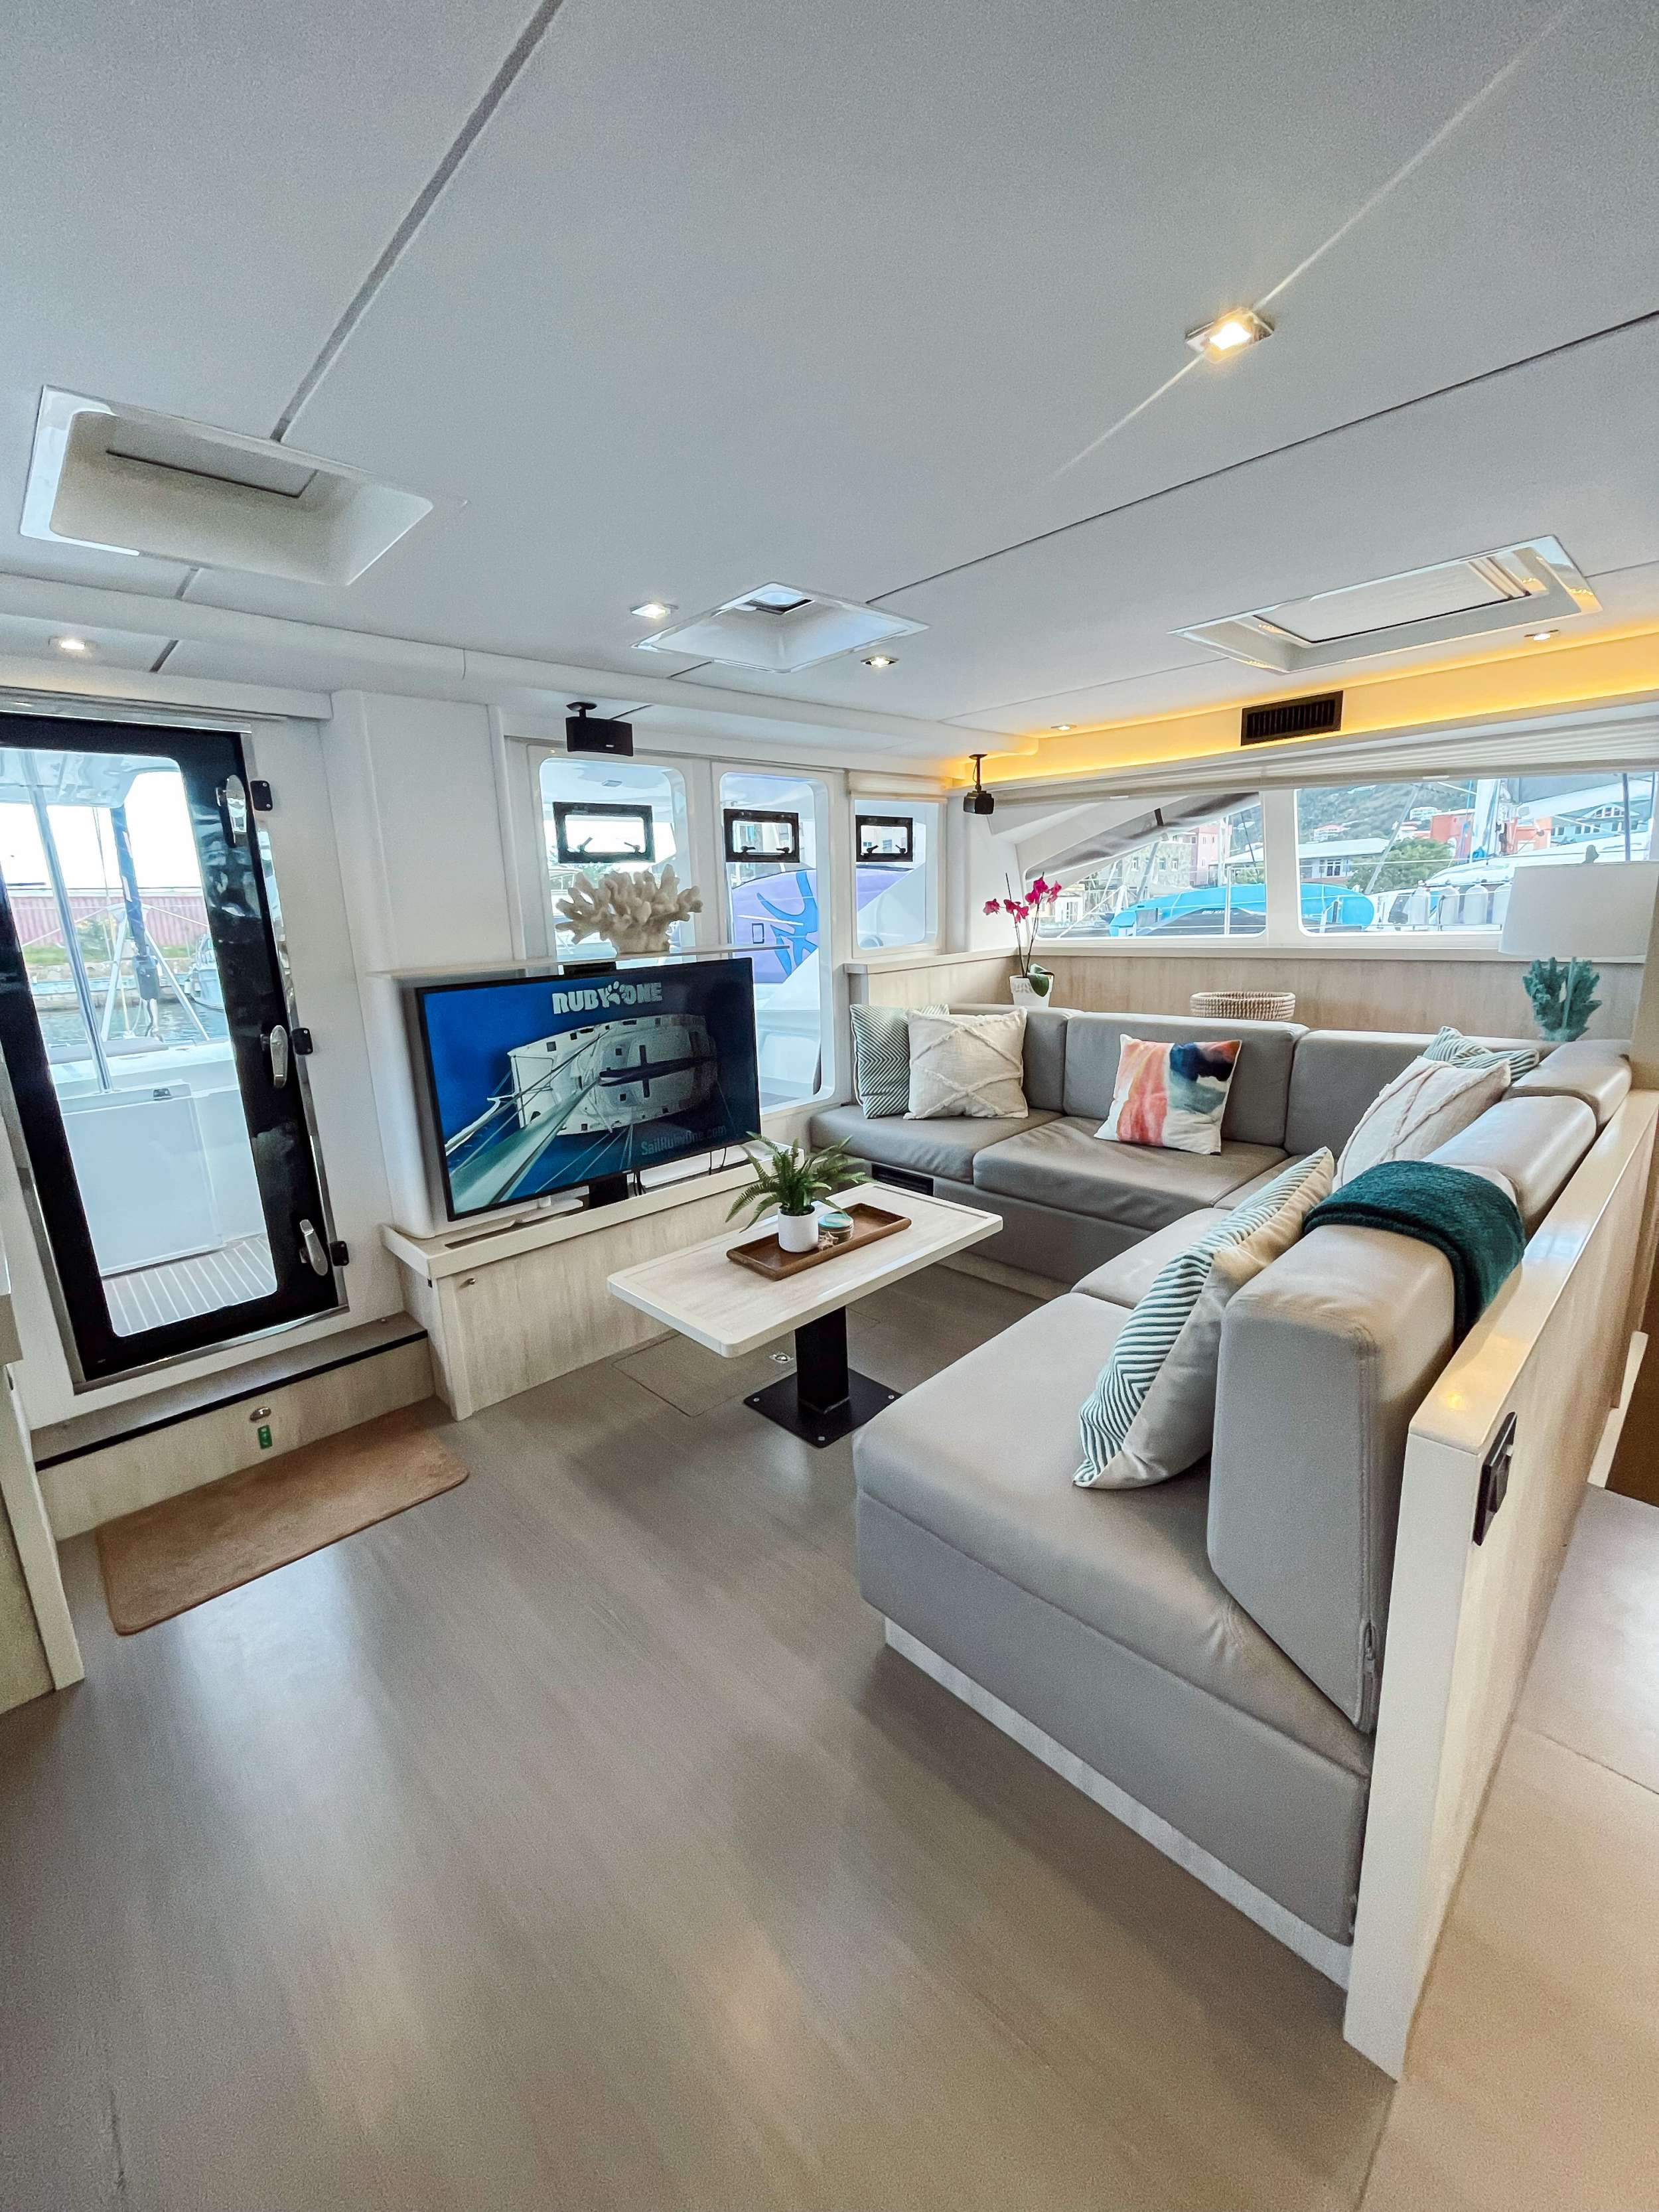 RUBY ONE Yacht Charter - Lounging saloon area